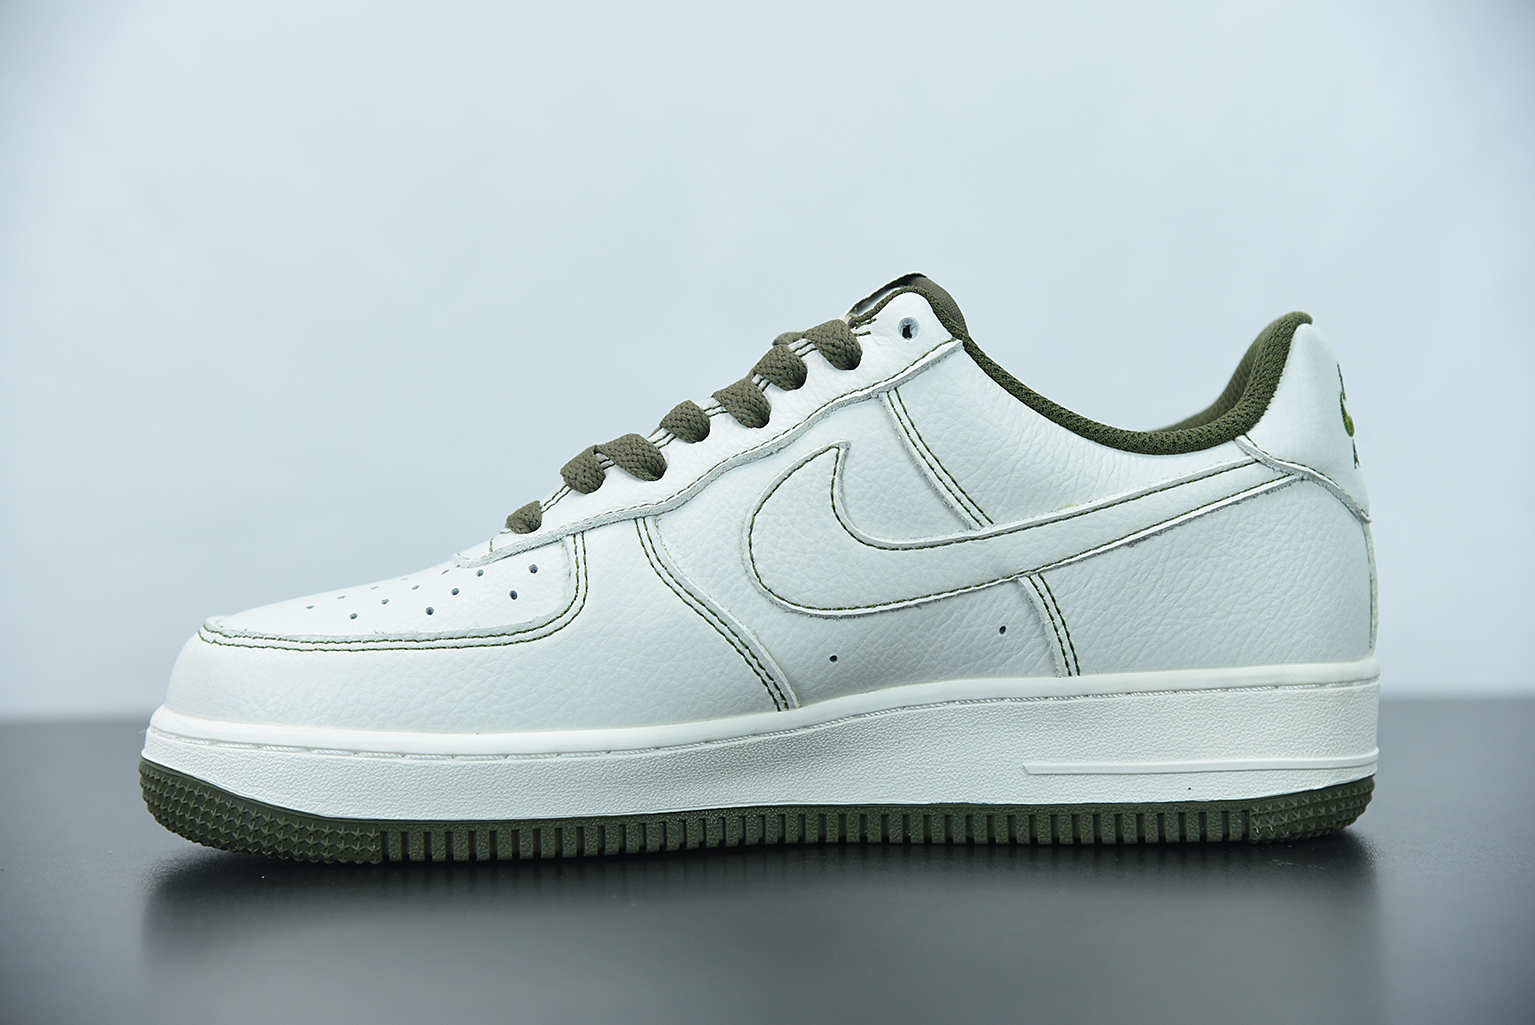 Nike Air Force 1 '07 Sneakers in Khaki and White-Green